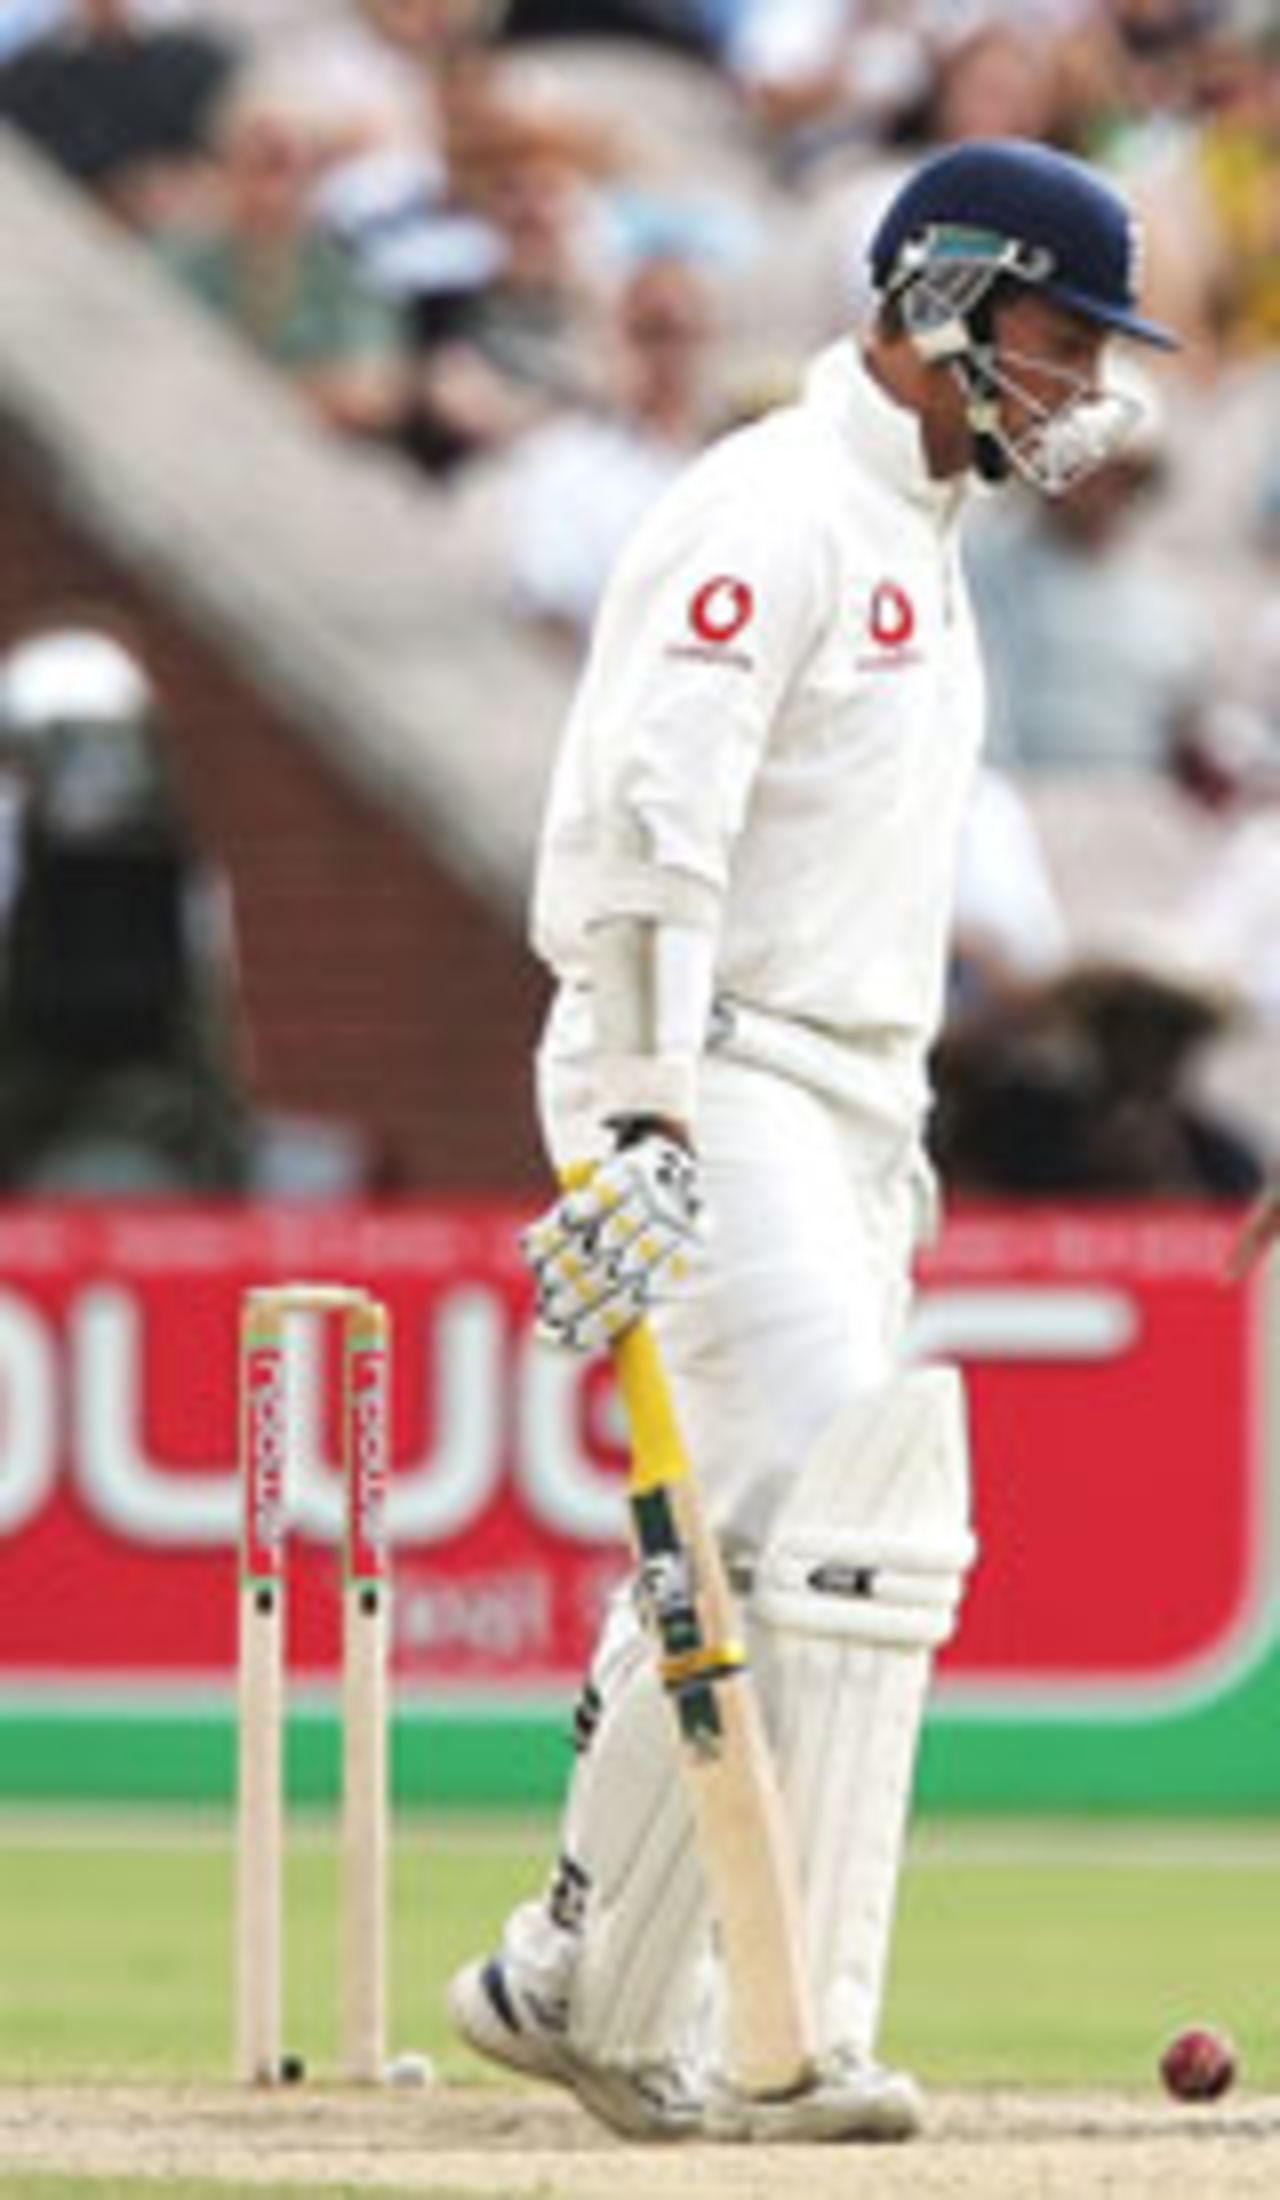 Marcus Trescothick is bowled by Corey Collymore, England v West Indies, 3rd Test, Old Trafford, August 16 2004